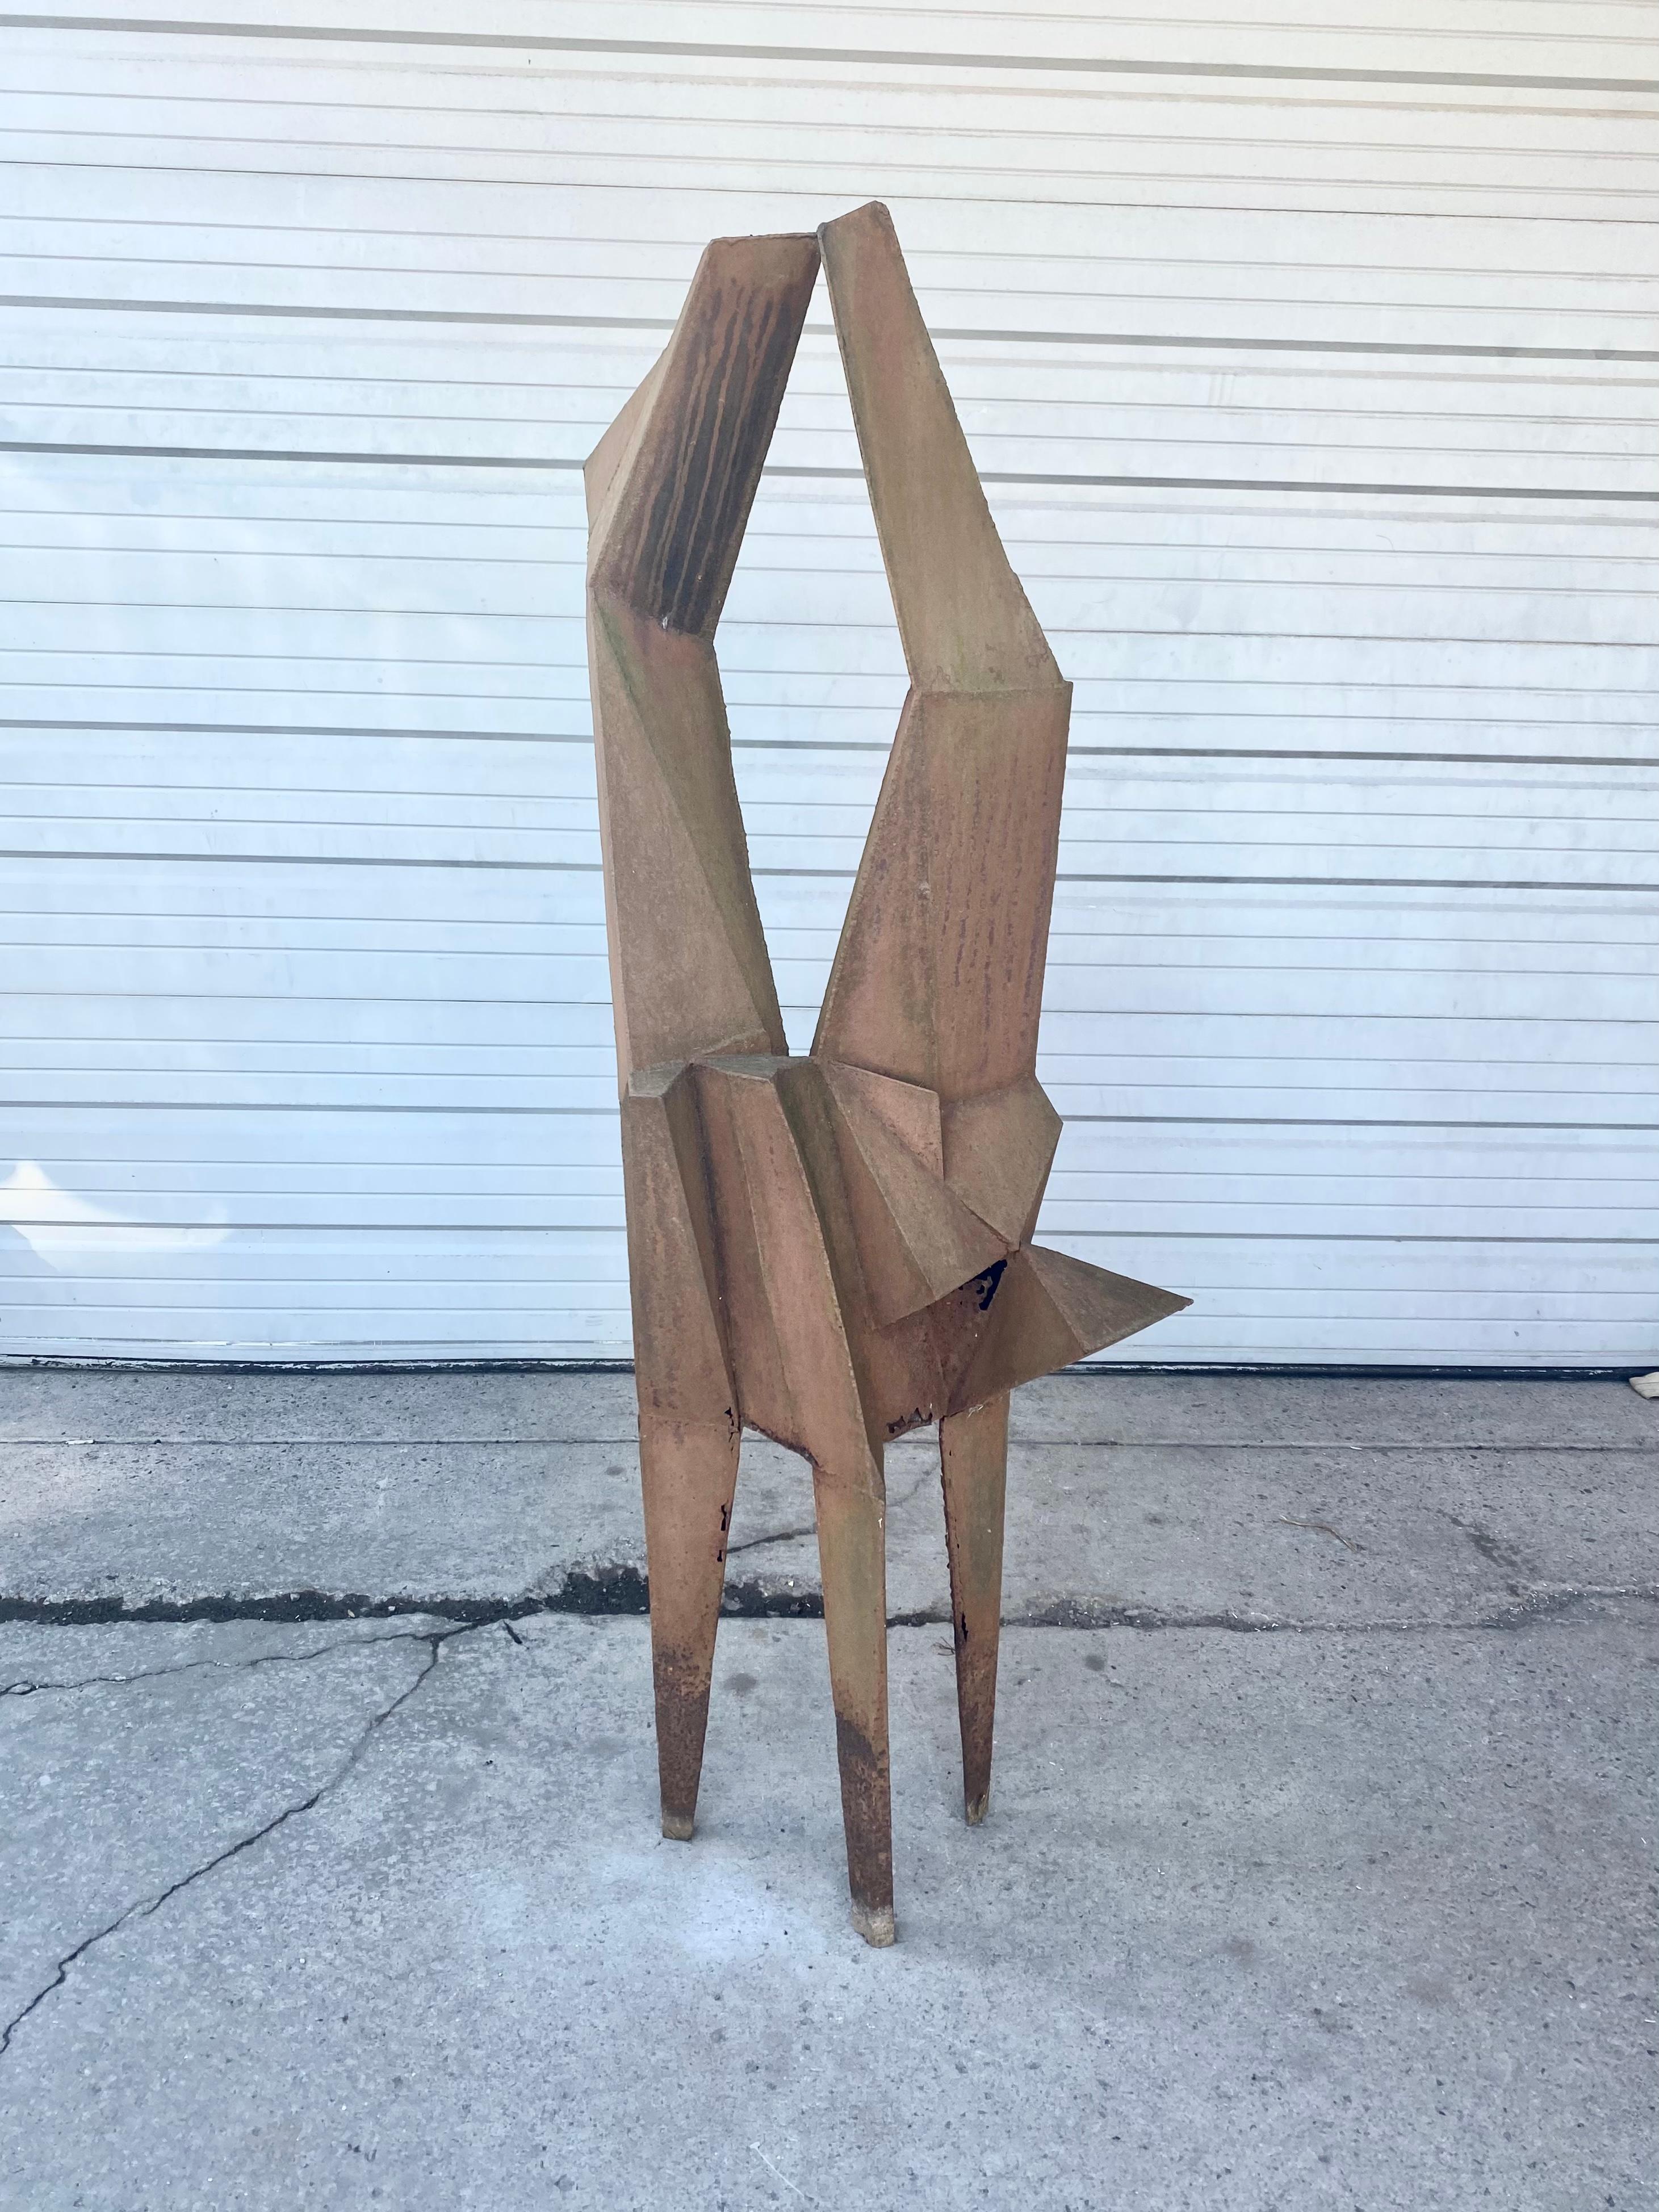 Large Welded steel Modernist Sculpture / garden, , manner of Lynn Chadwick In Distressed Condition In Buffalo, NY